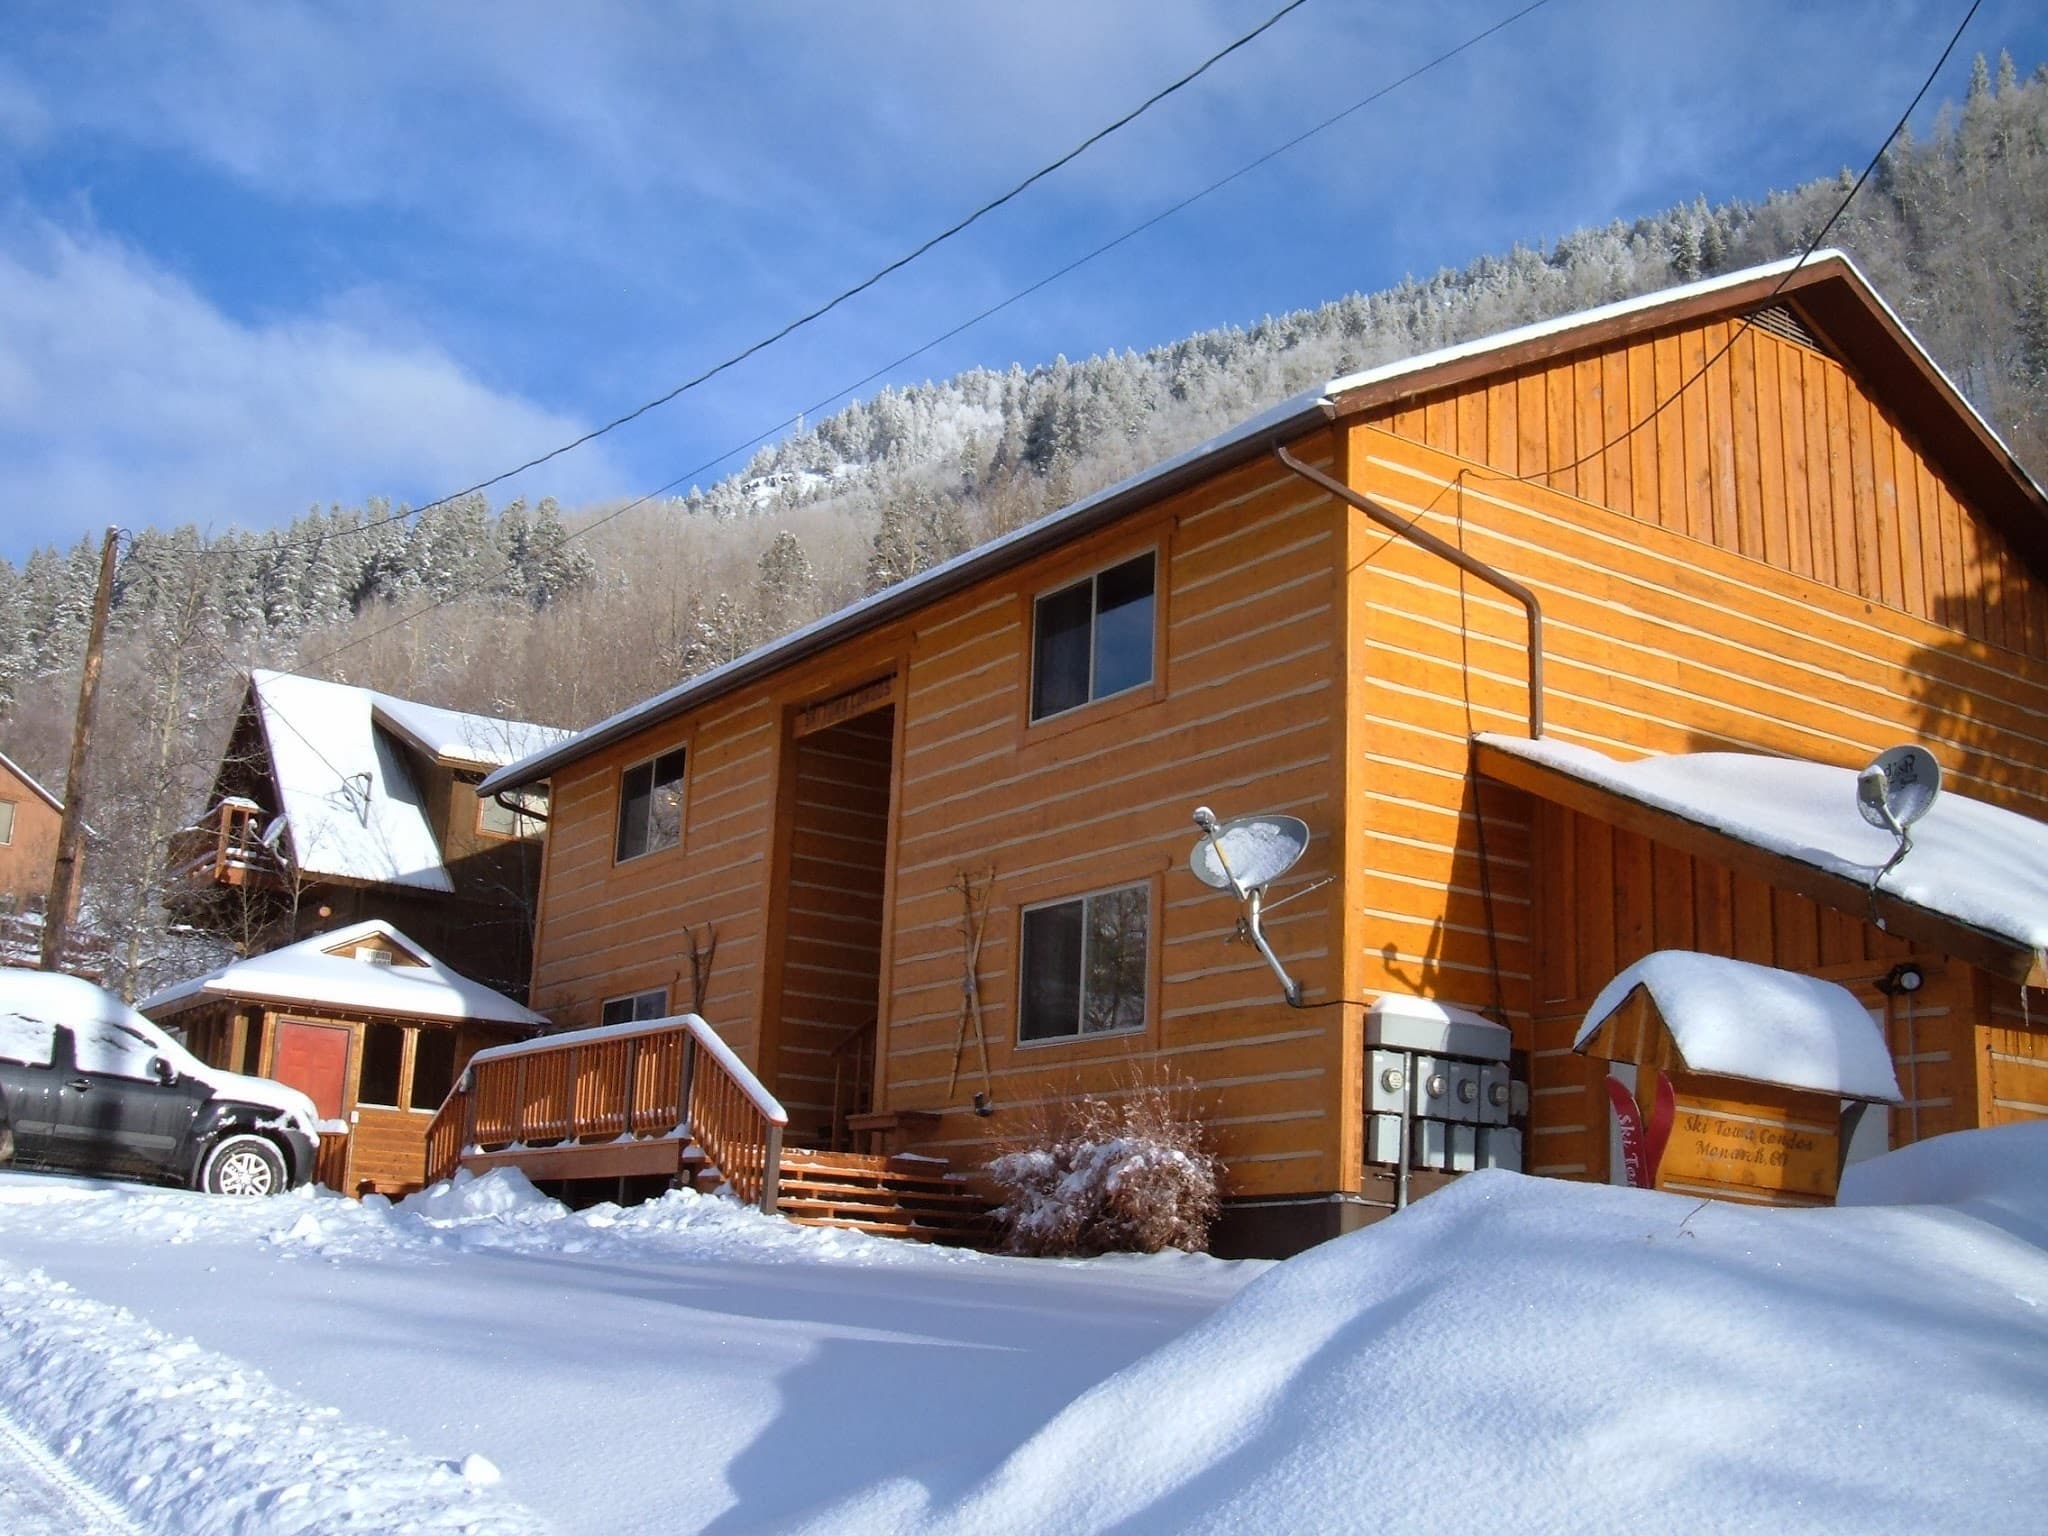 Winter with snow all around a 4-plex in the mountains.